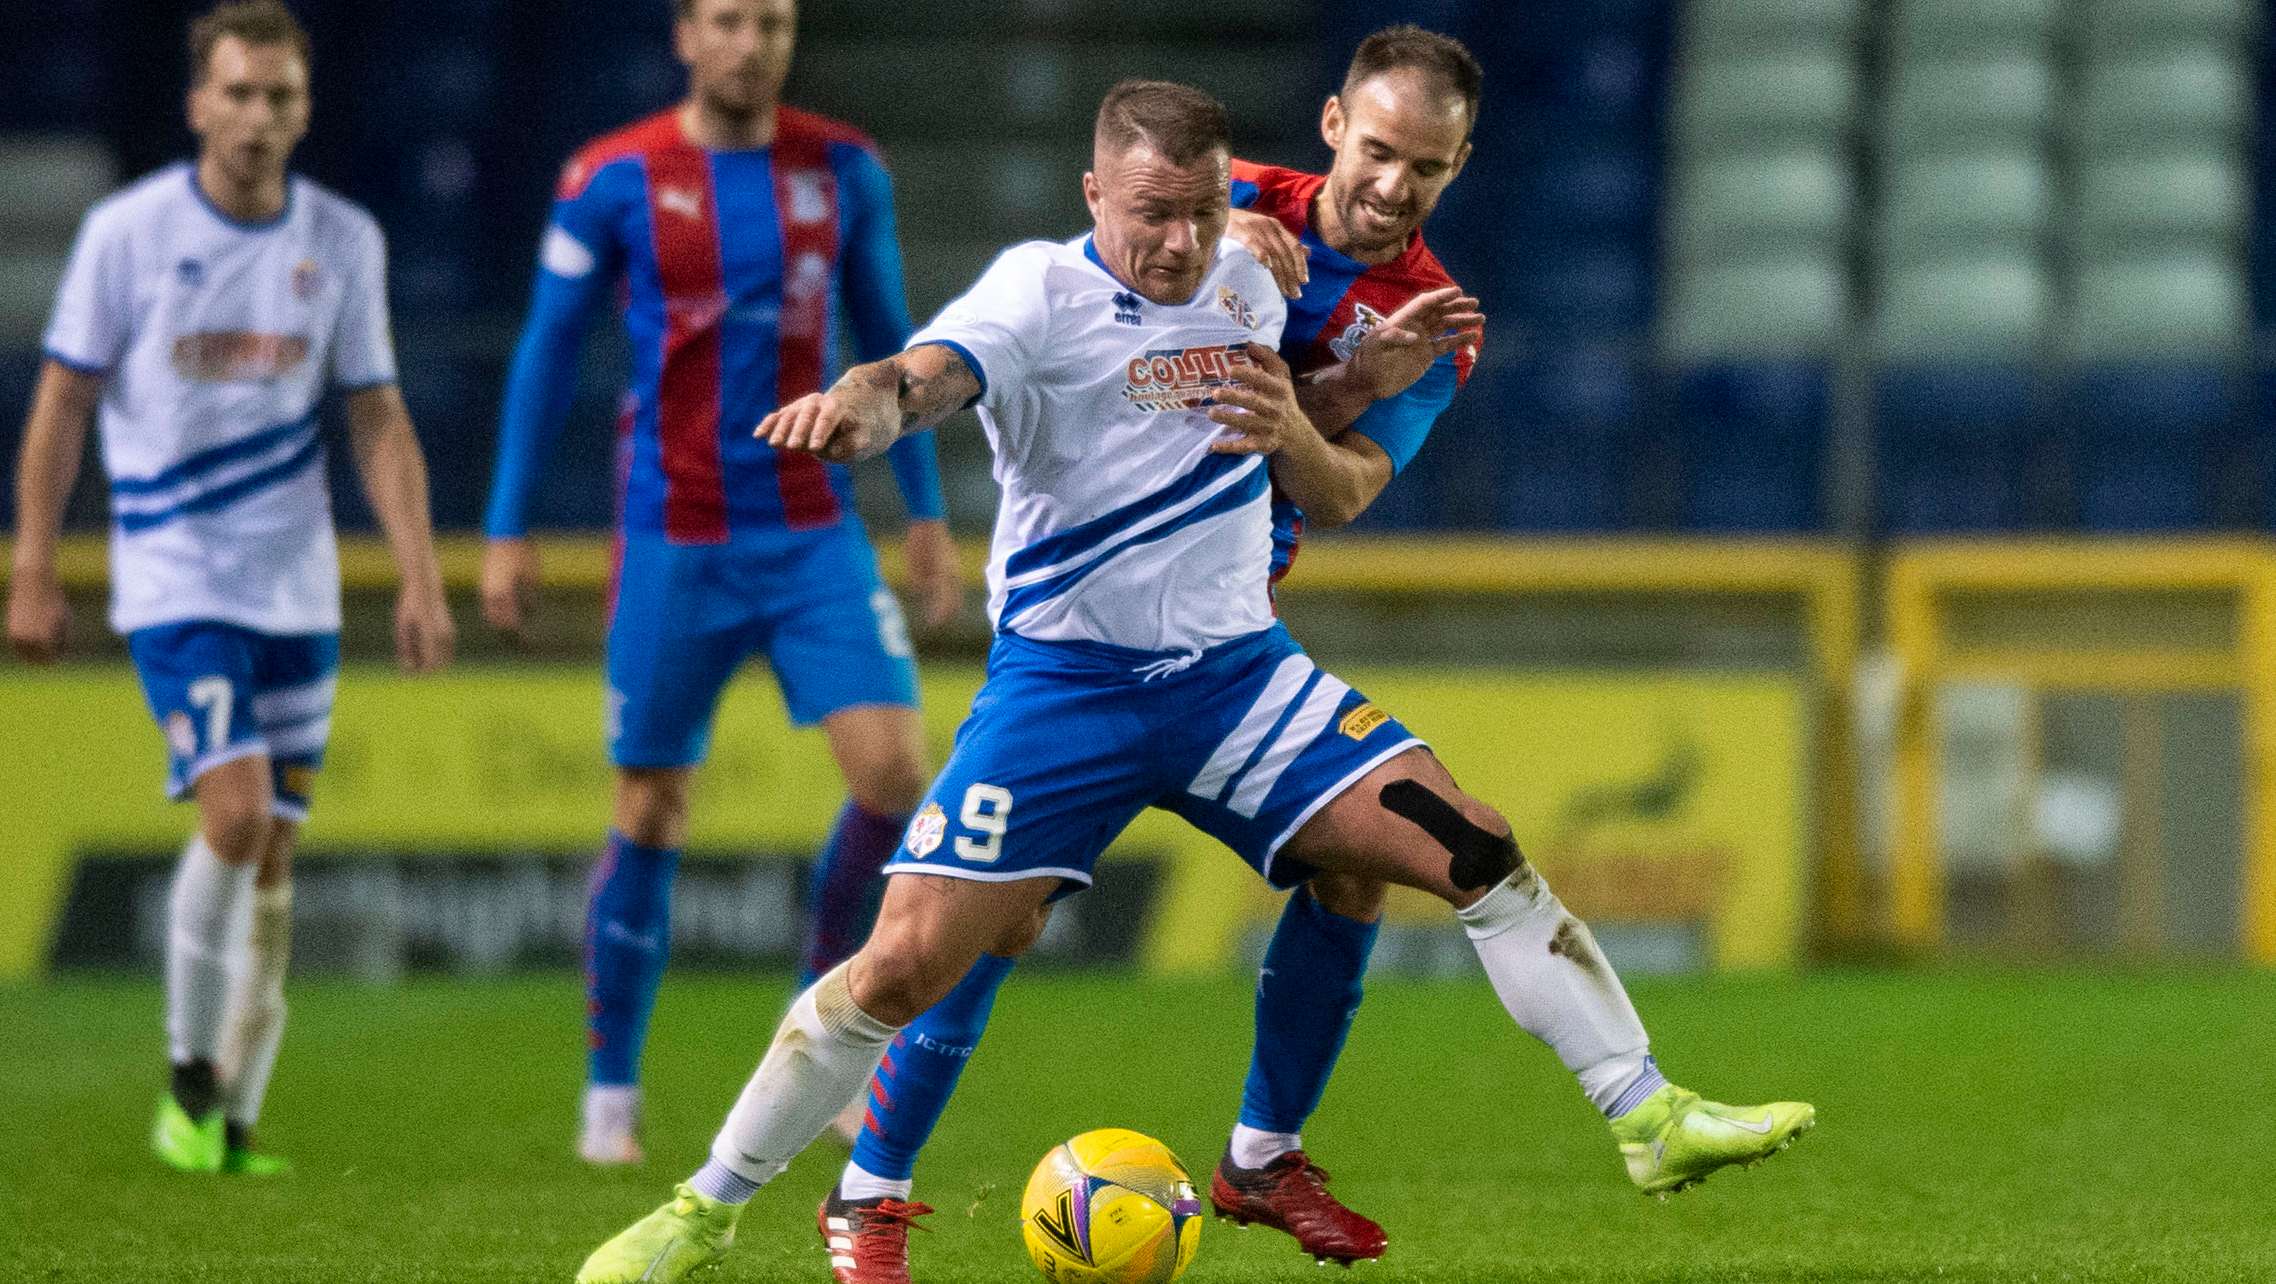 David Cox in action for Cowdenbeath last year.